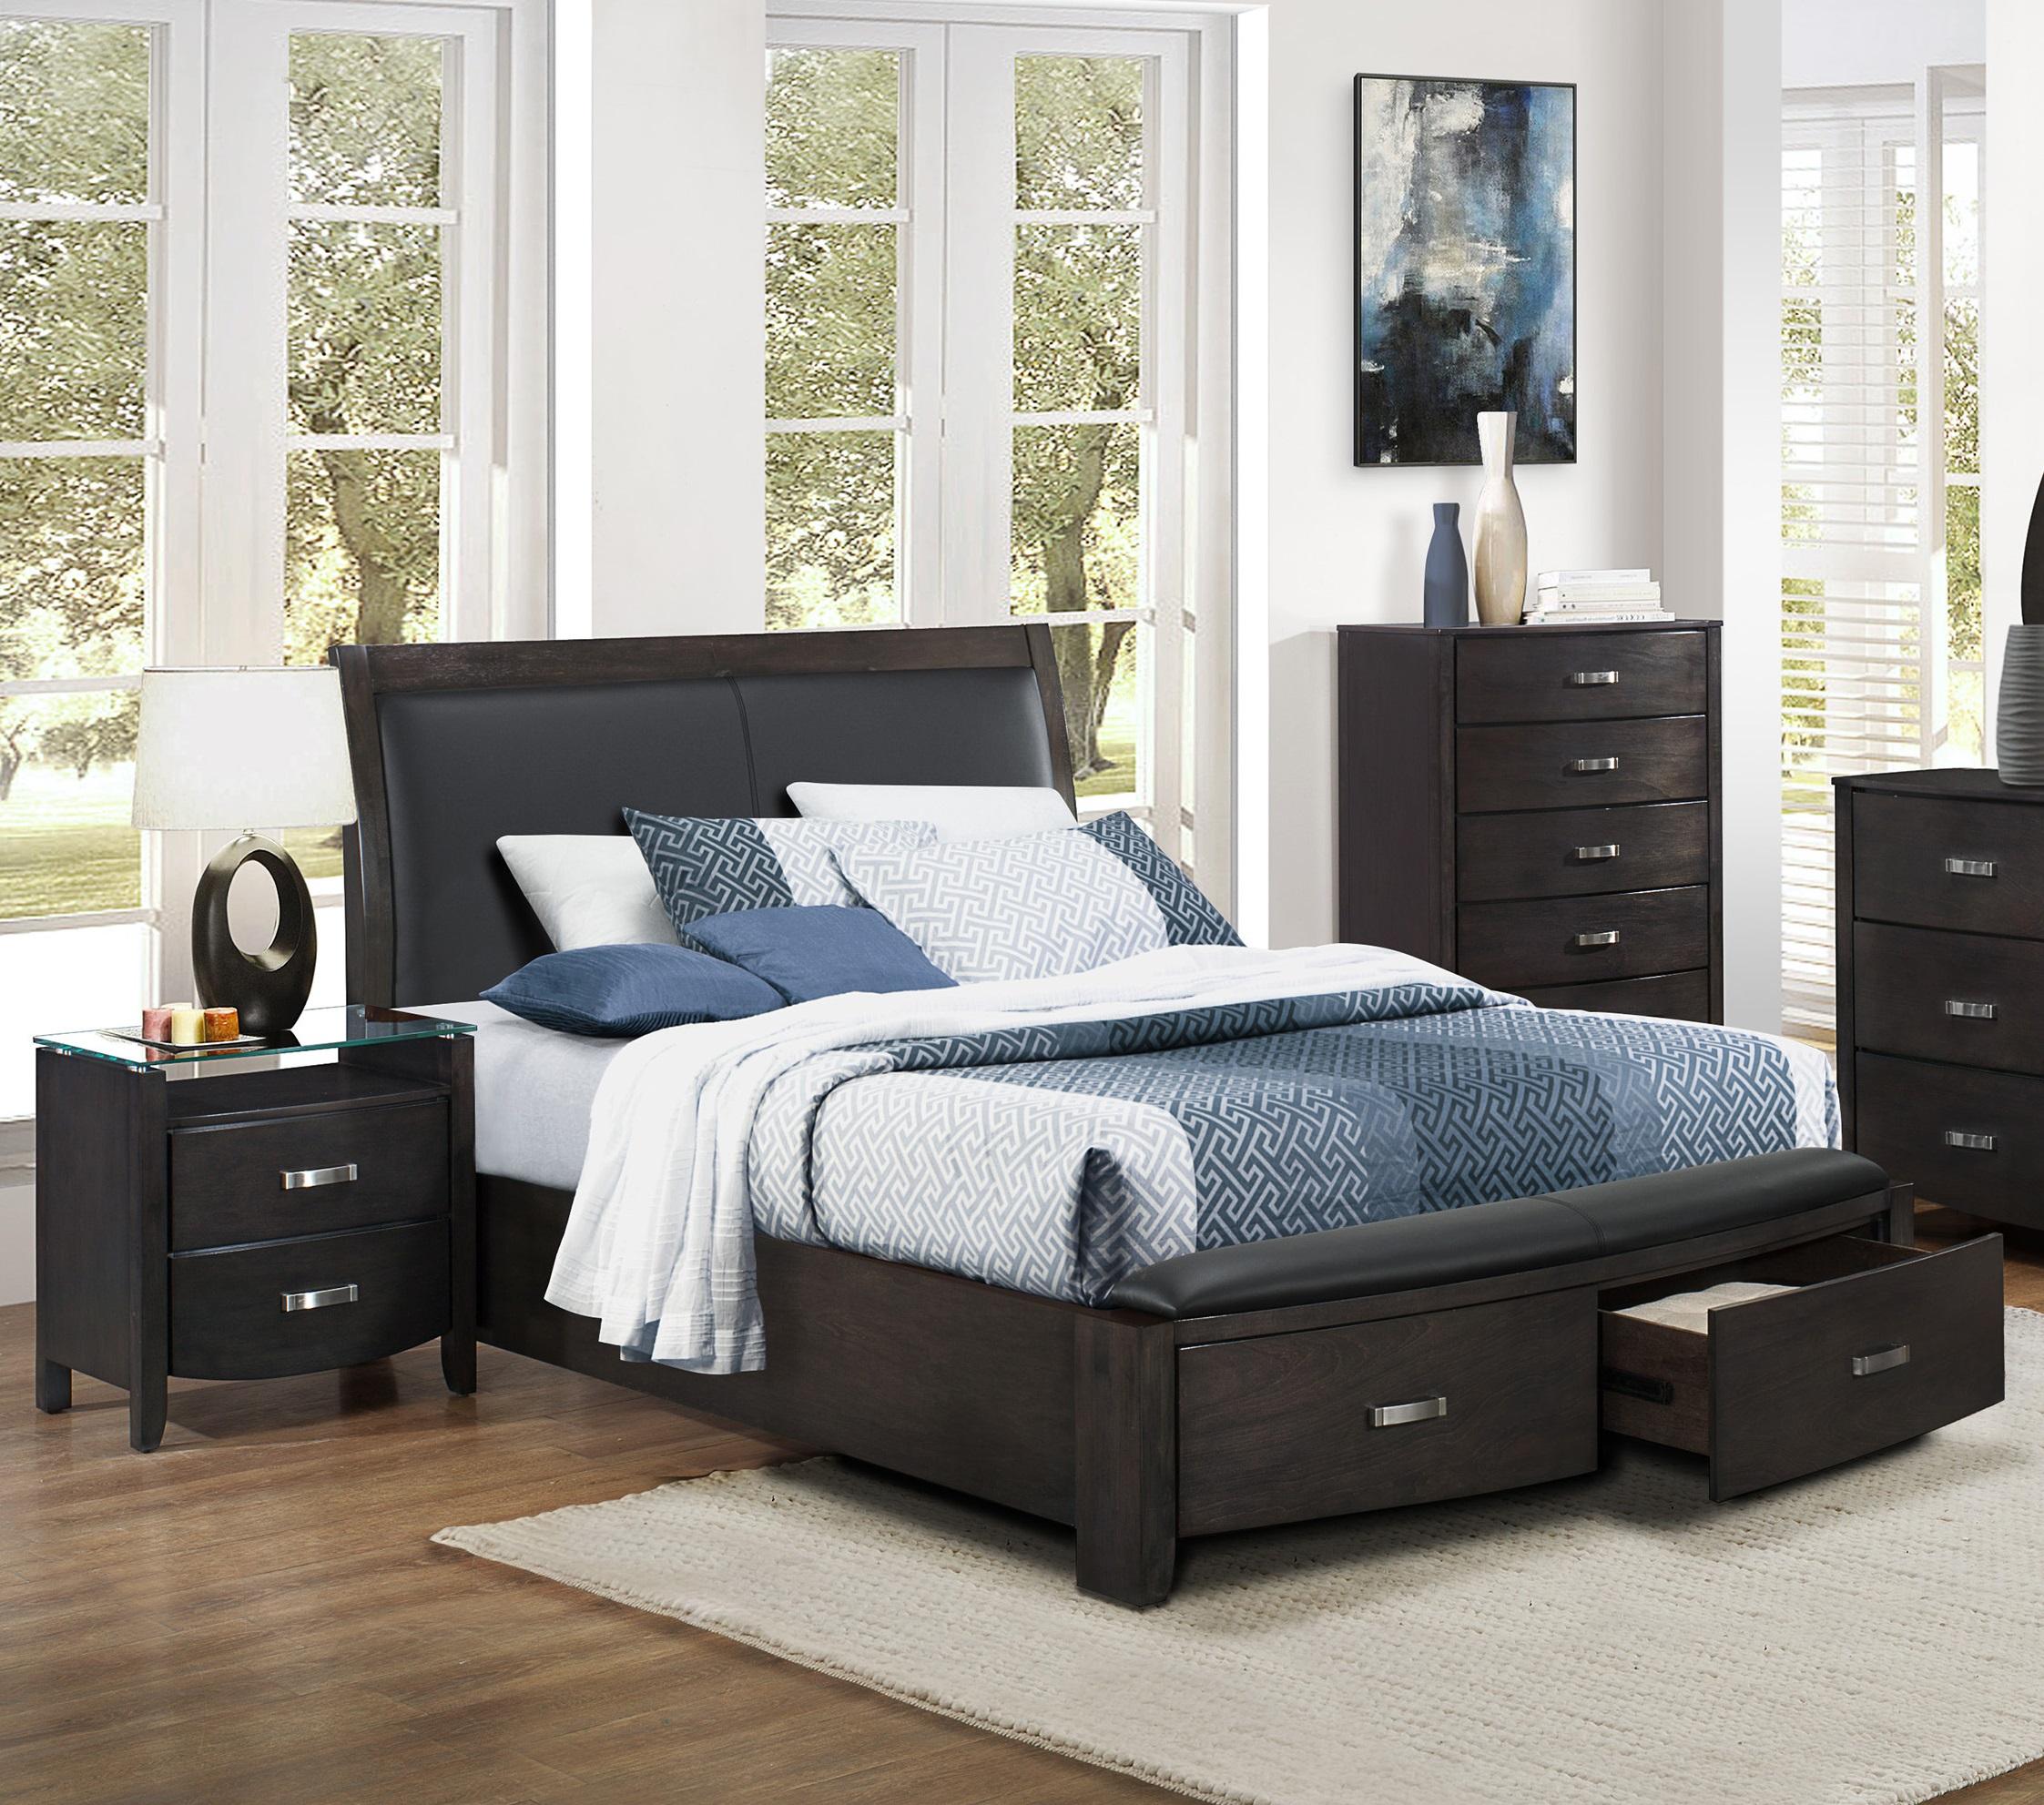 Contemporary Bedroom Set 1737NGY-1-3PC Lyric 1737NGY-1-3PC in Gray Faux Leather